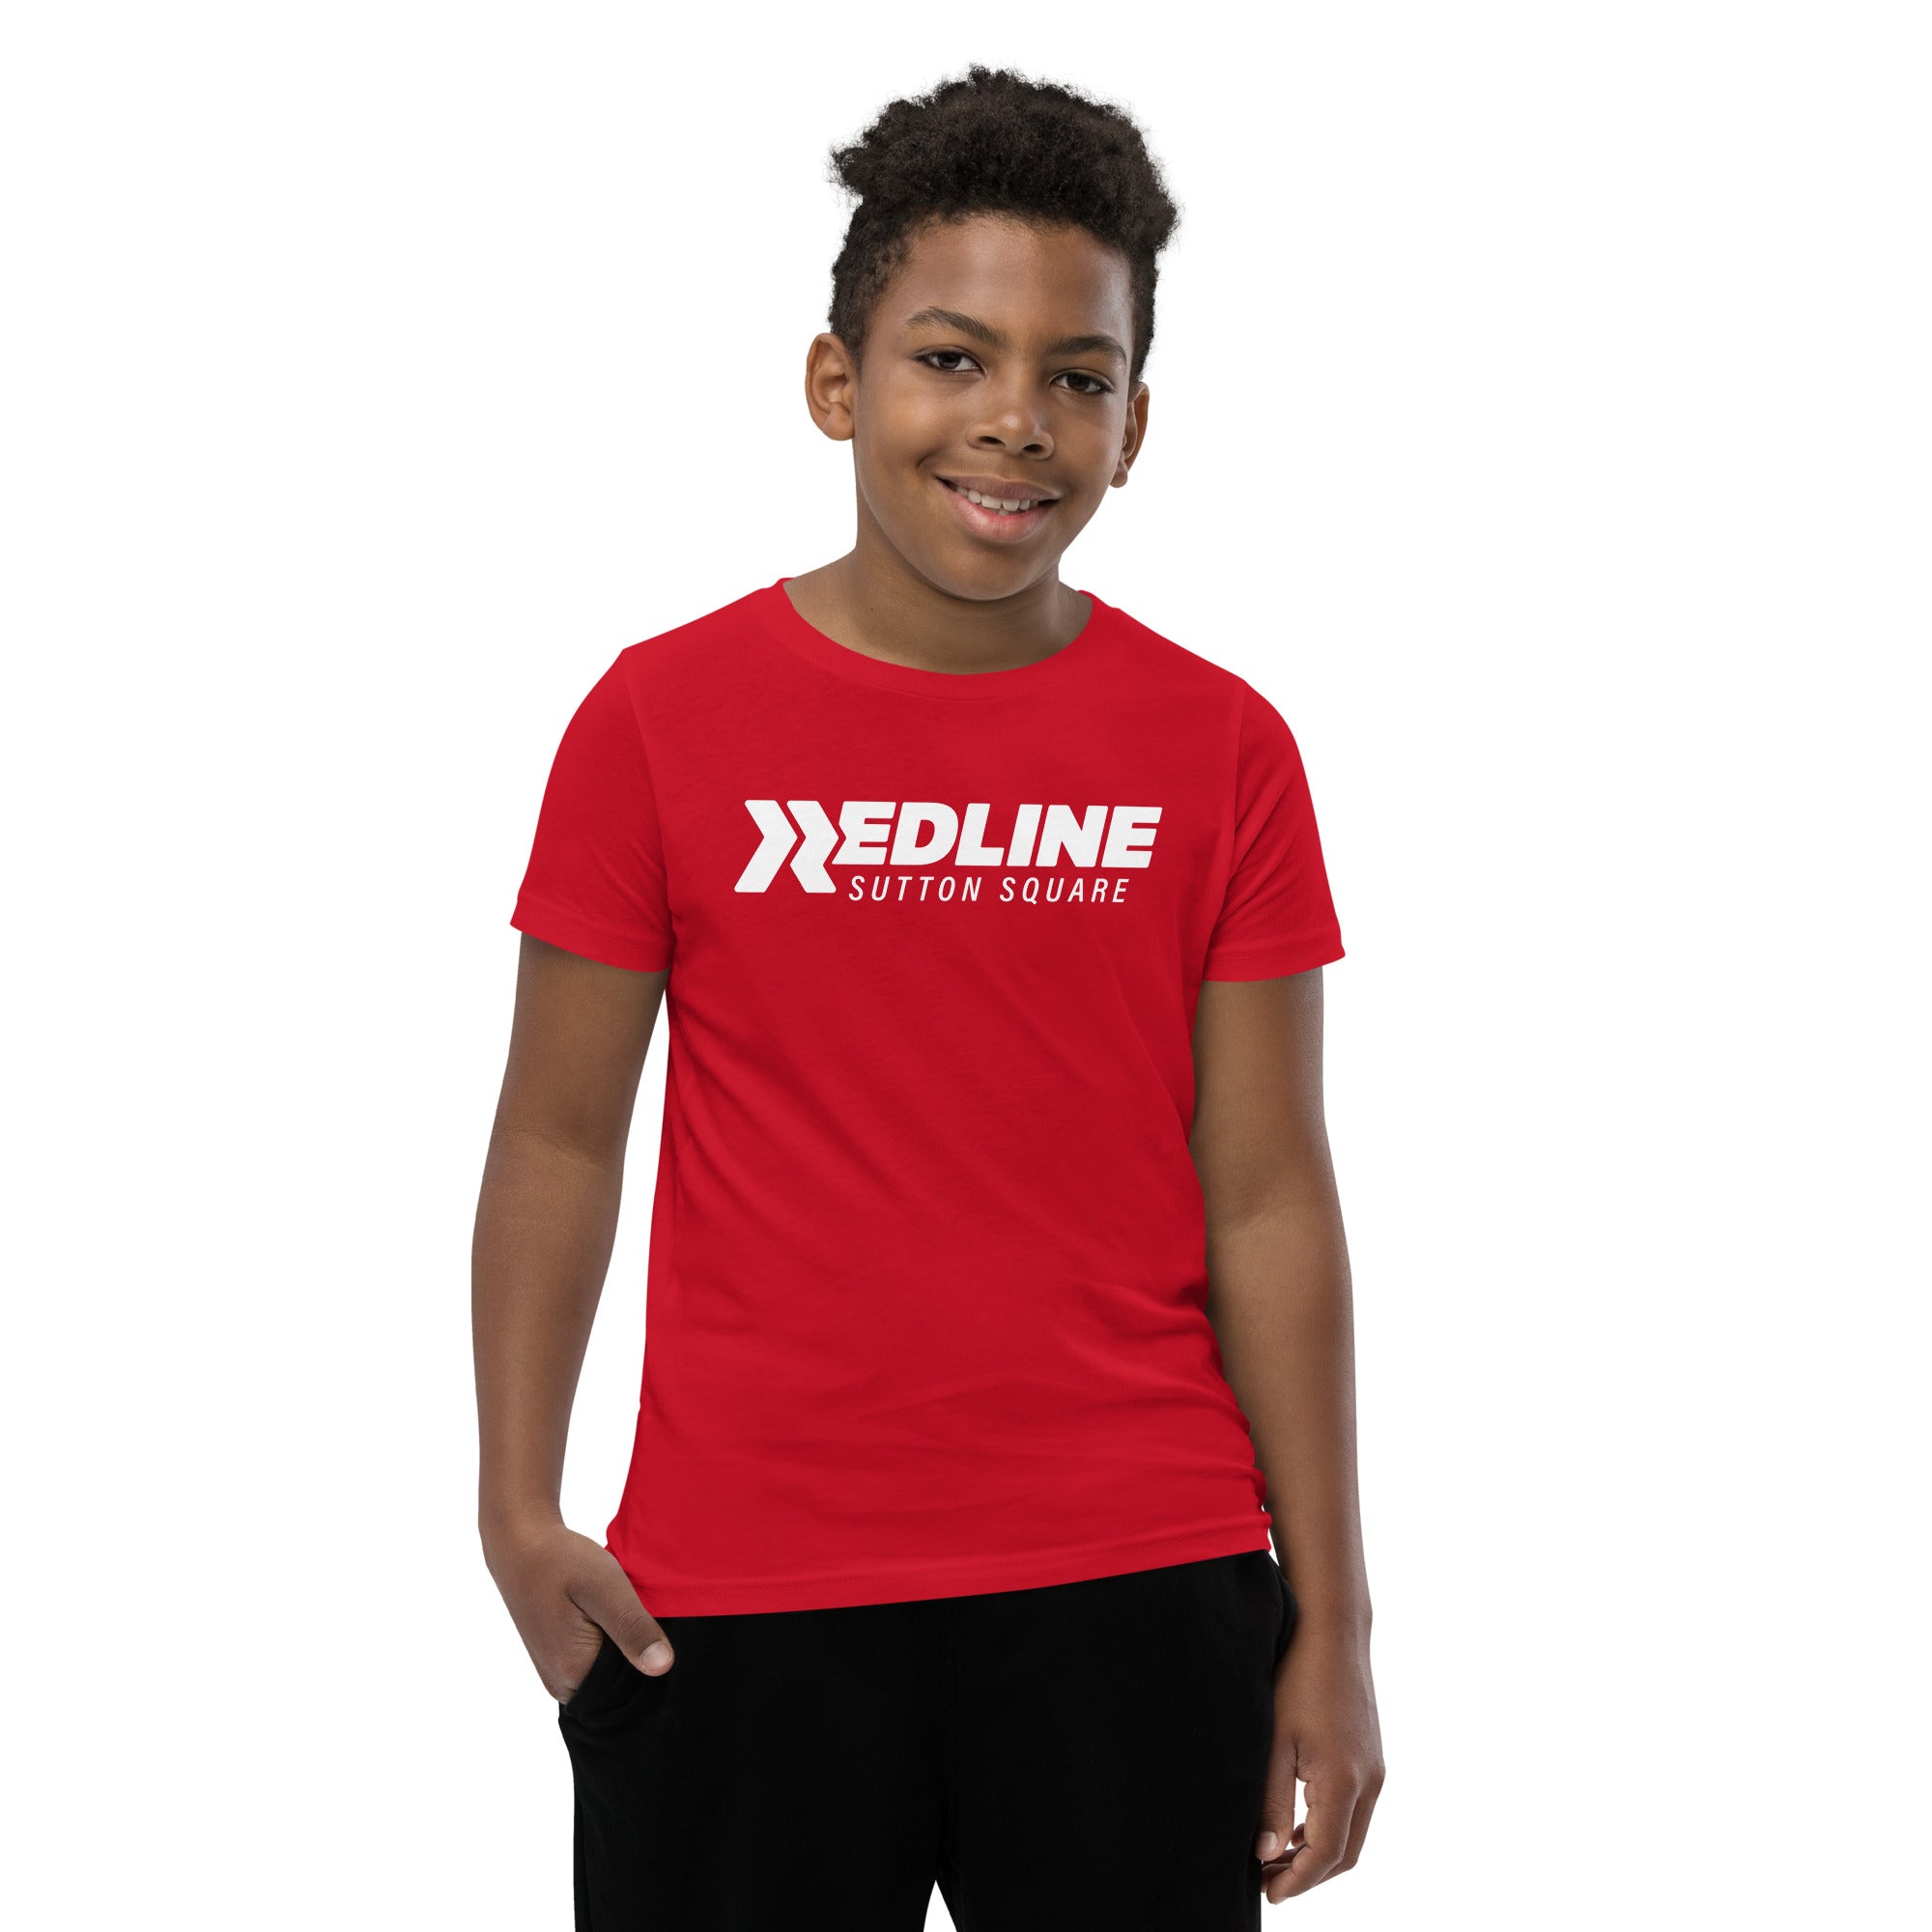 Sutton Square Logo W - Red Youth Short Sleeve T-Shirt